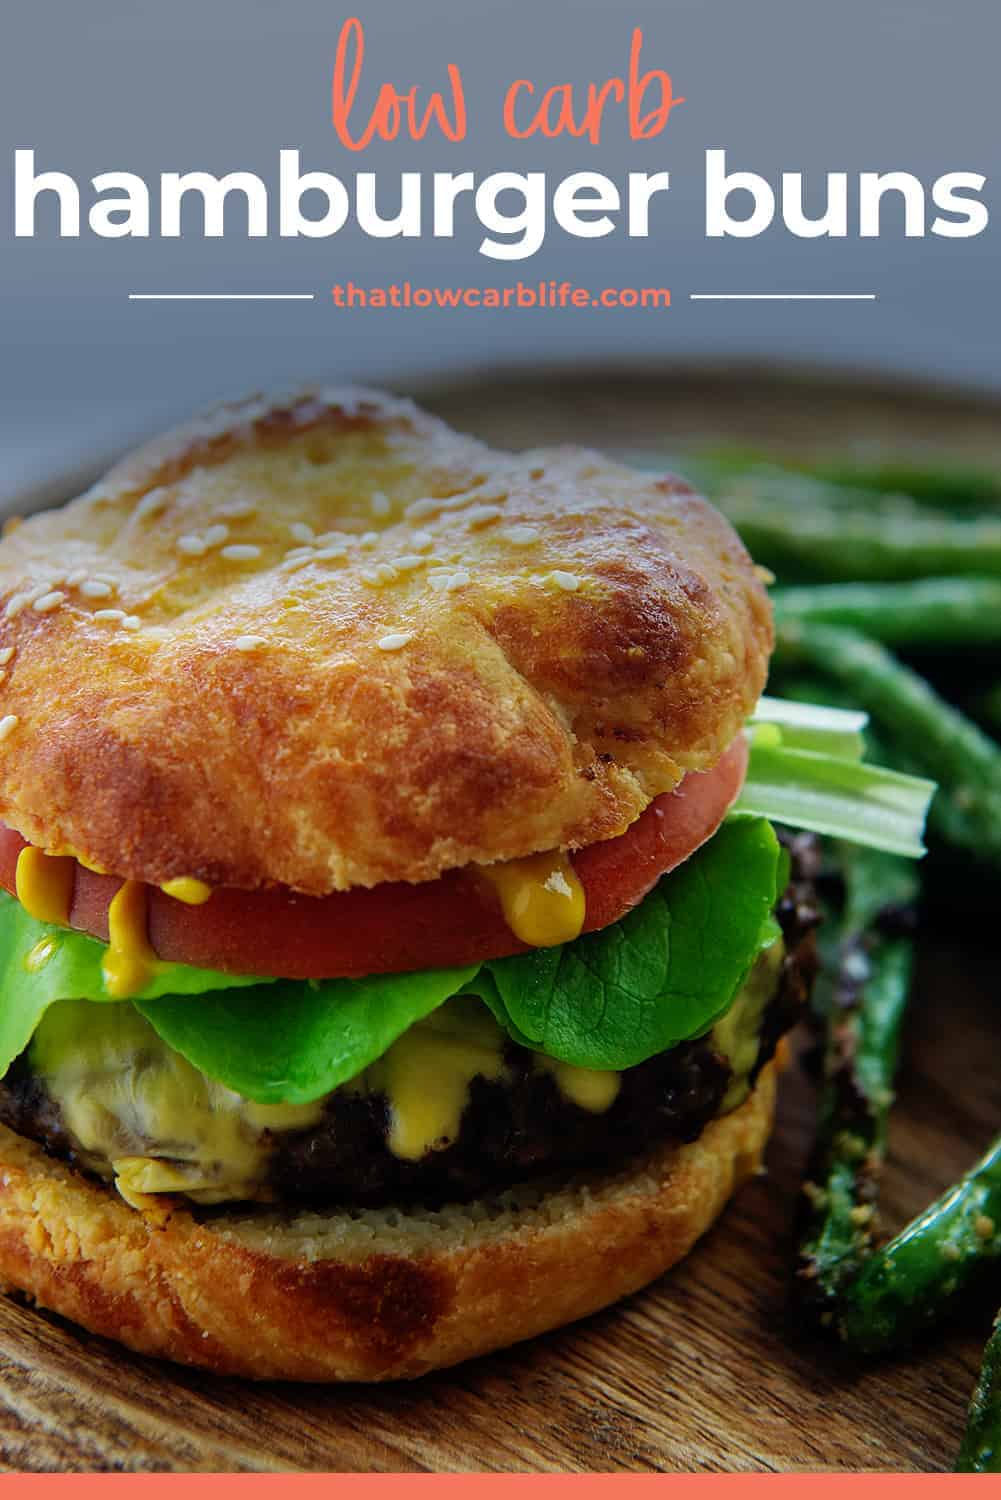 low carb hamburger with text for Pinterest.